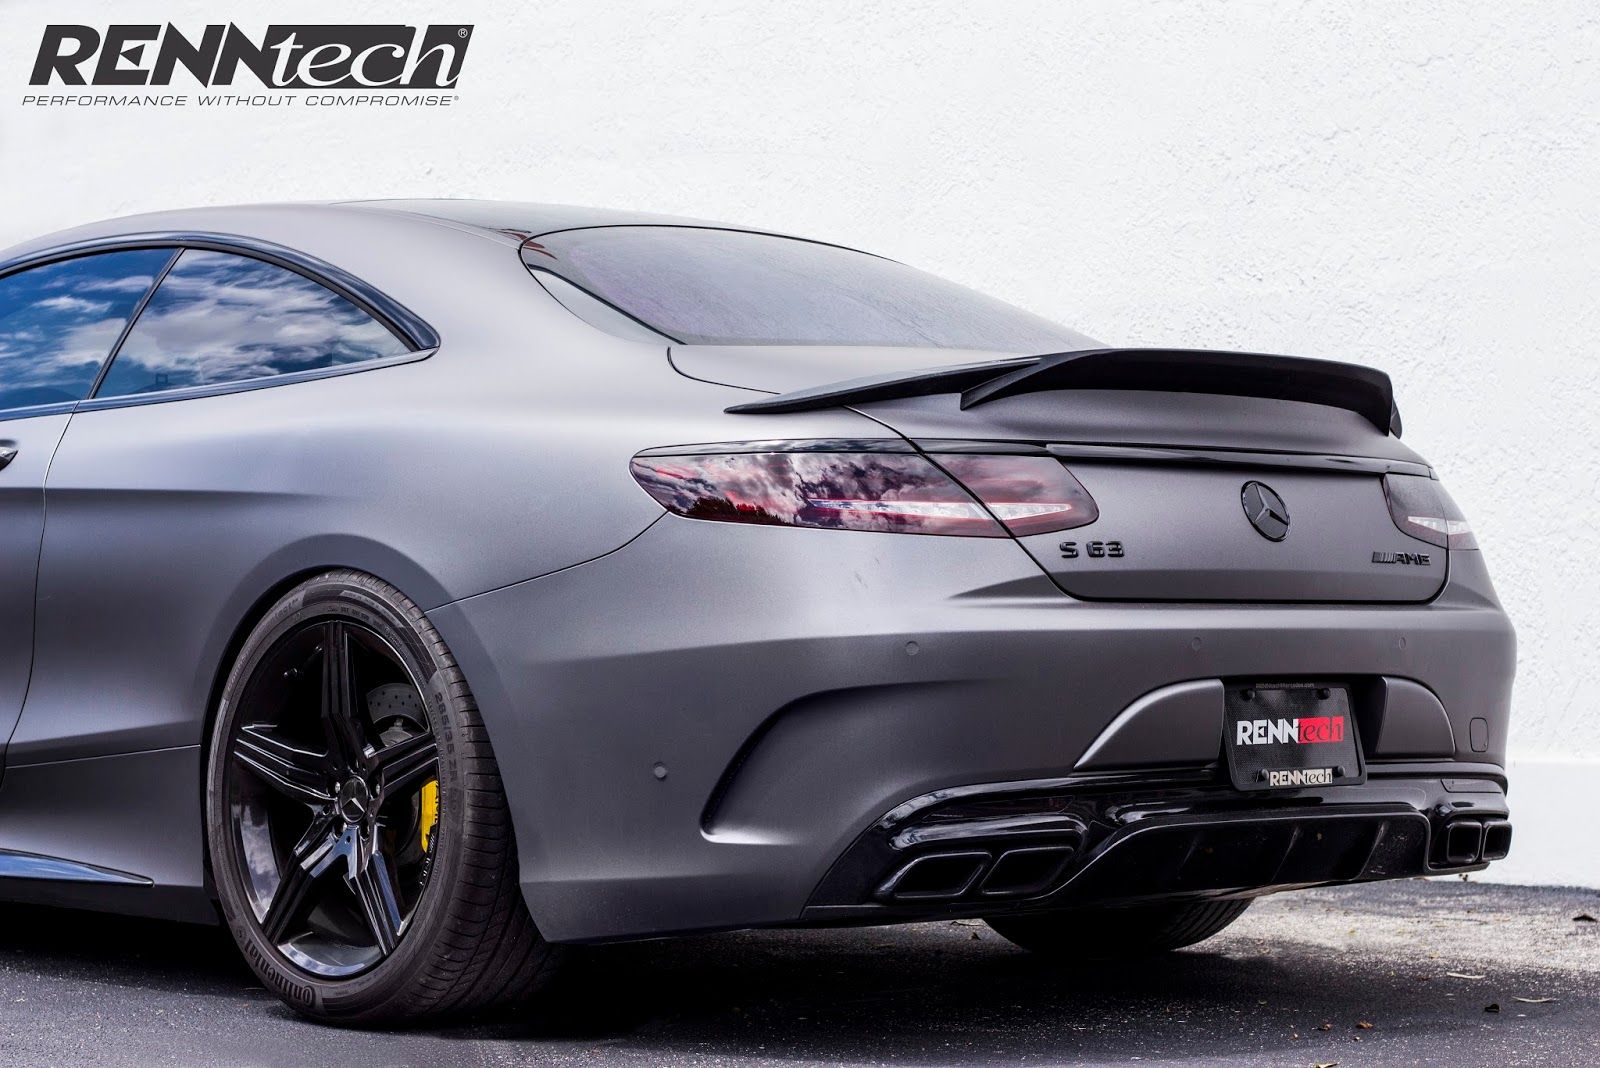 2016 Mercedes-AMG S63 Coupe by Renntech